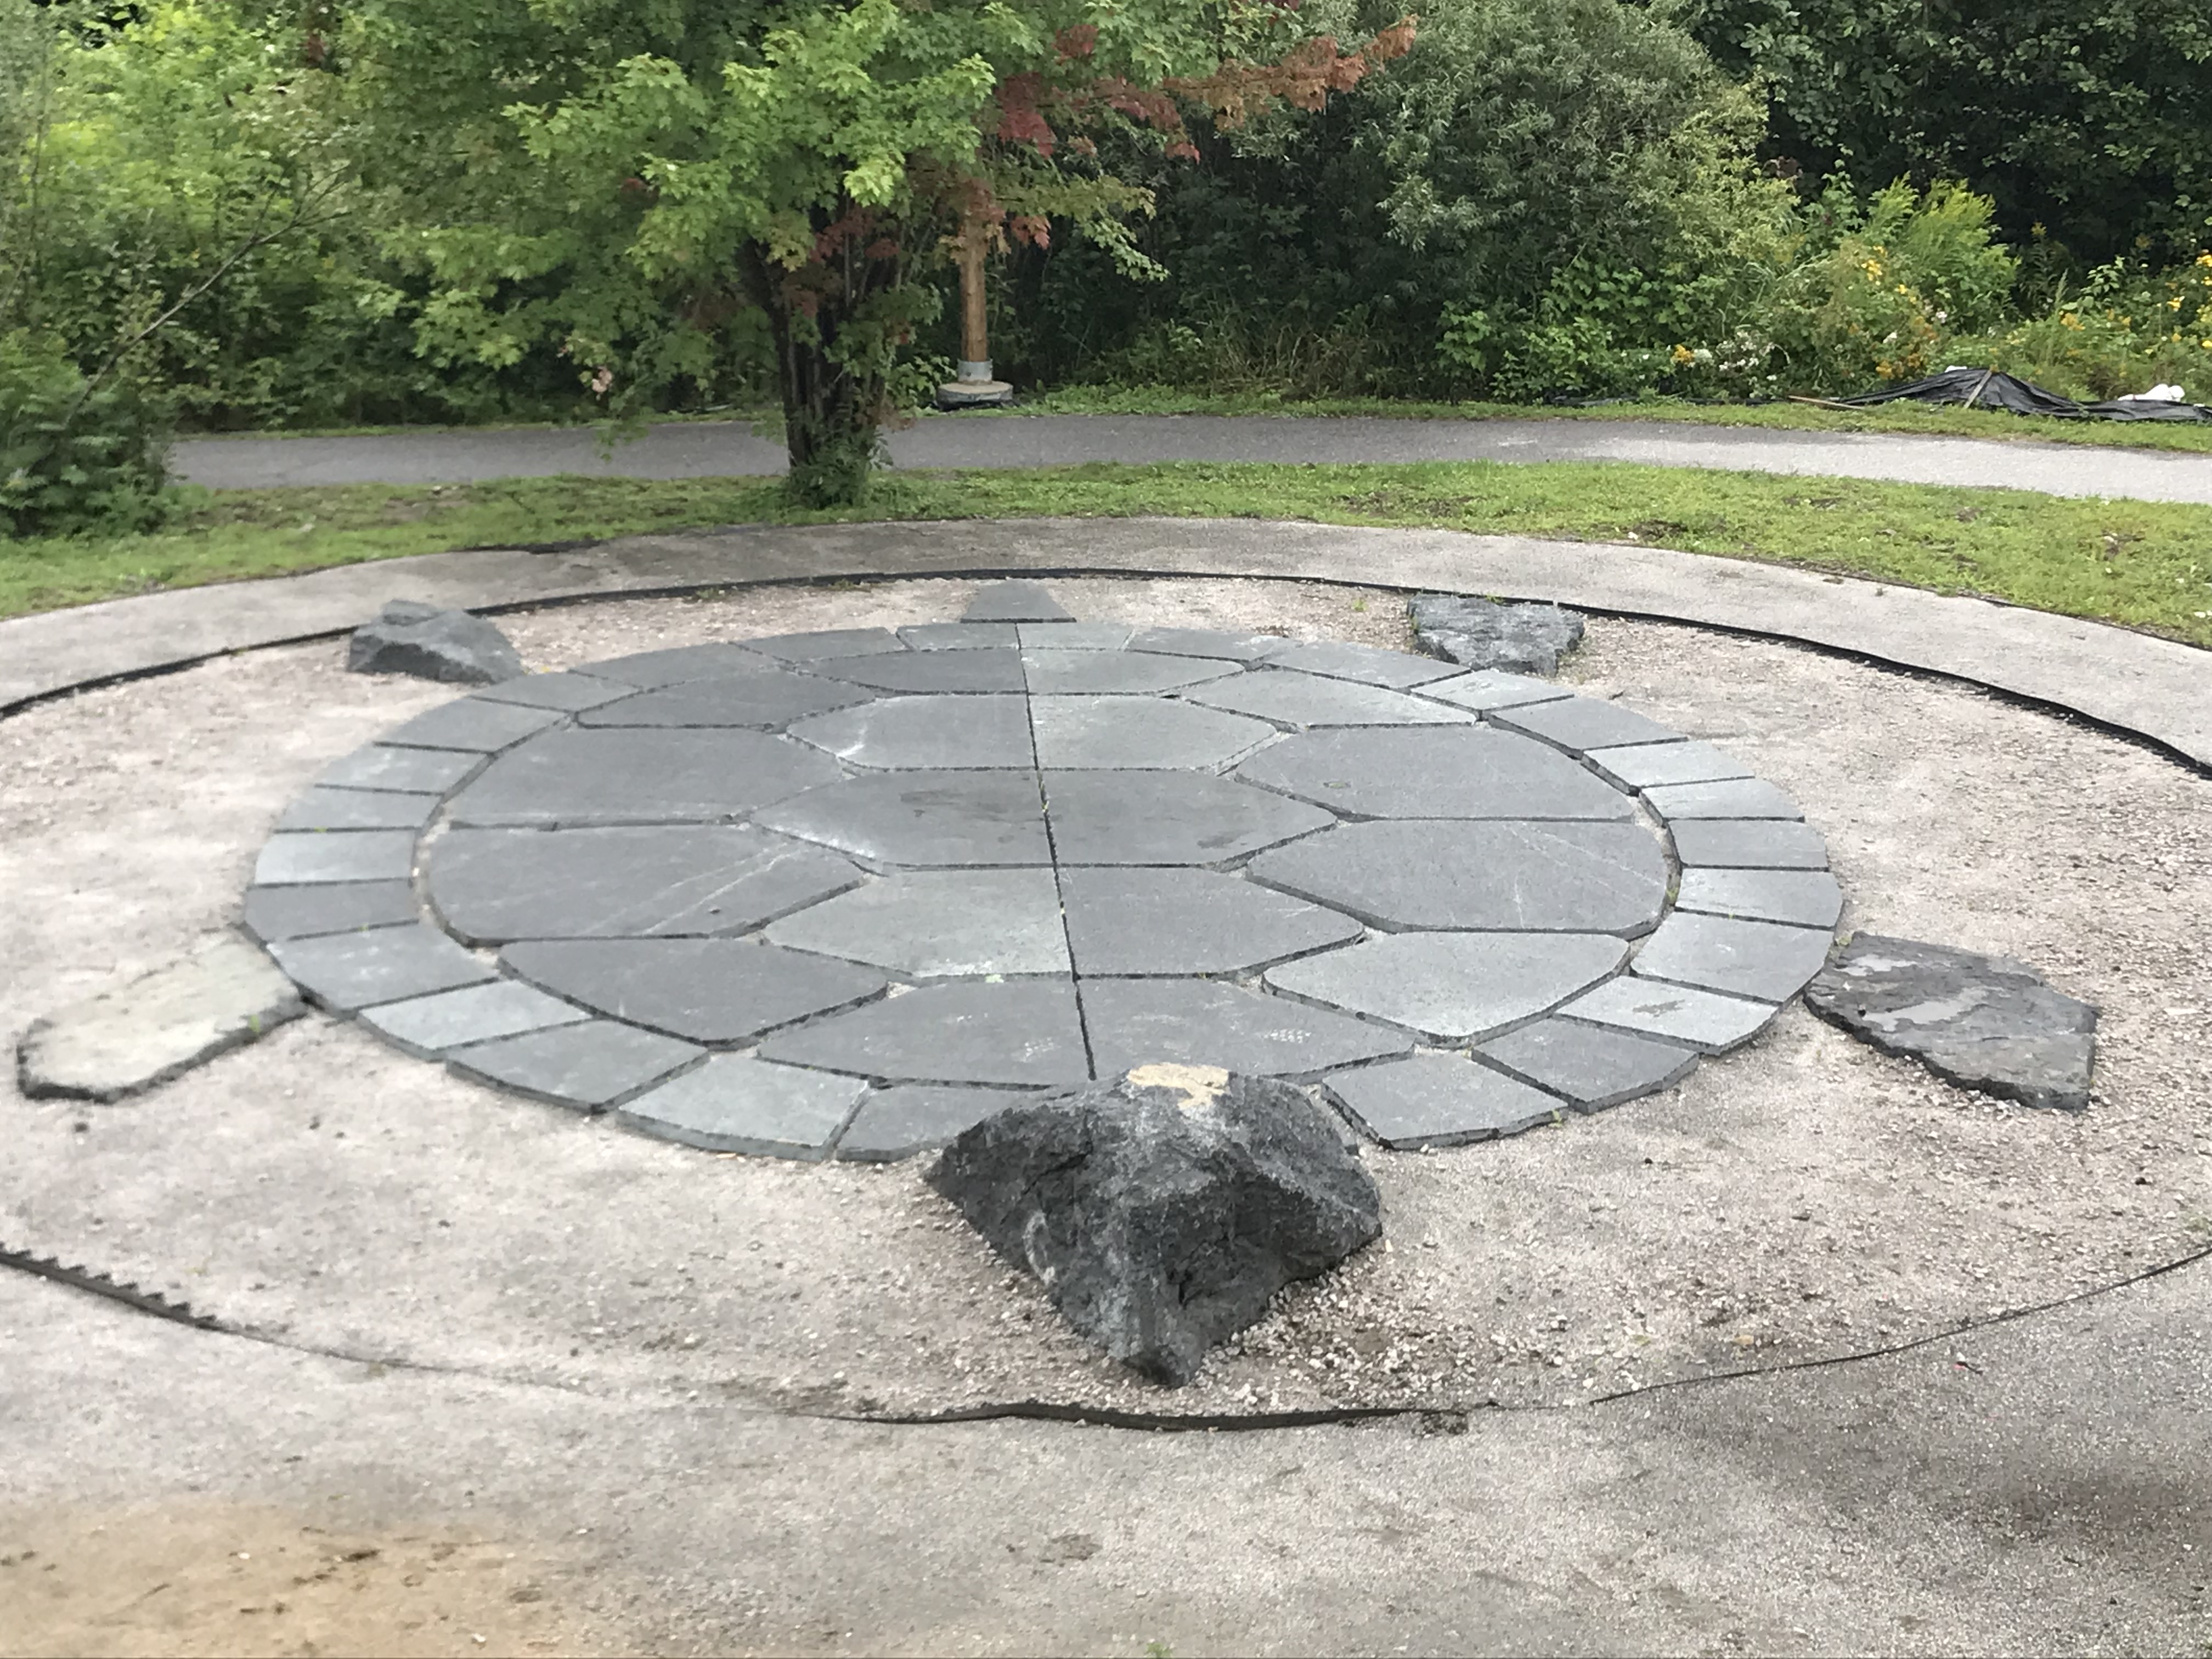 Miskwaadesi; a sculpture of a turtle made of flat stones inside a circle, laid in a greenspace surrounded by trees and a walking path. 